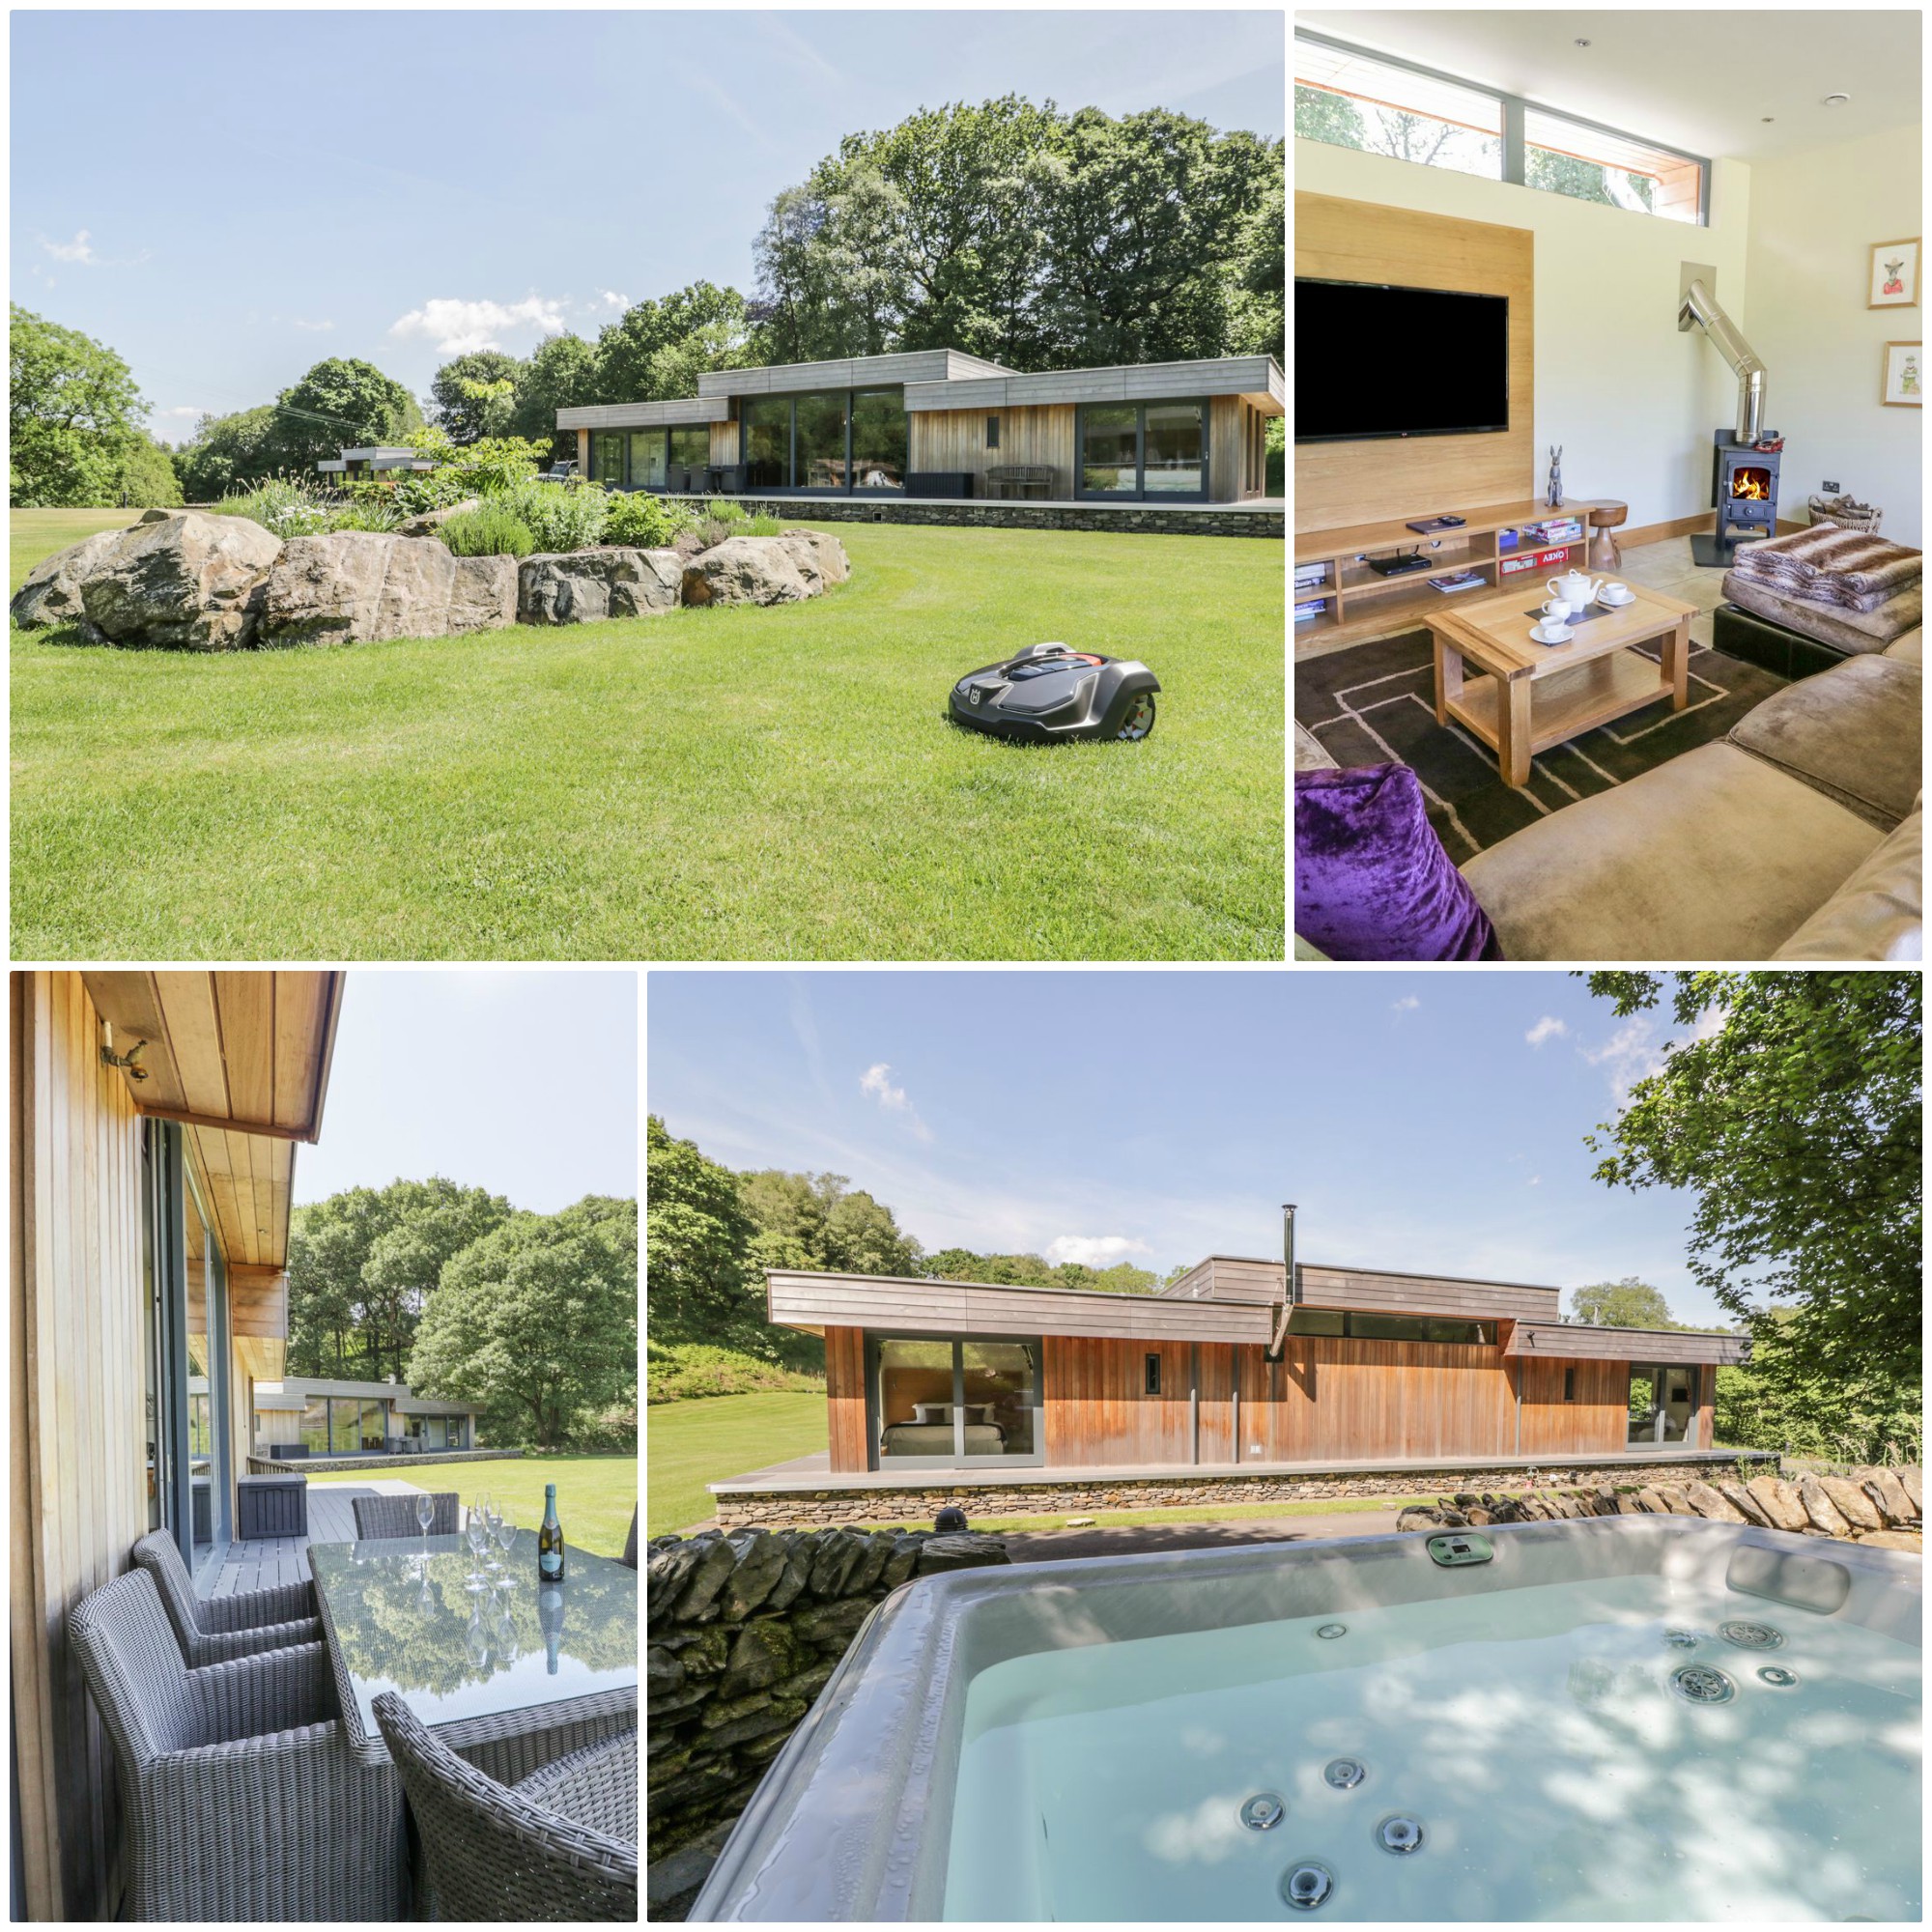 sleeps 6 in a tranquil setting with its own hot tub